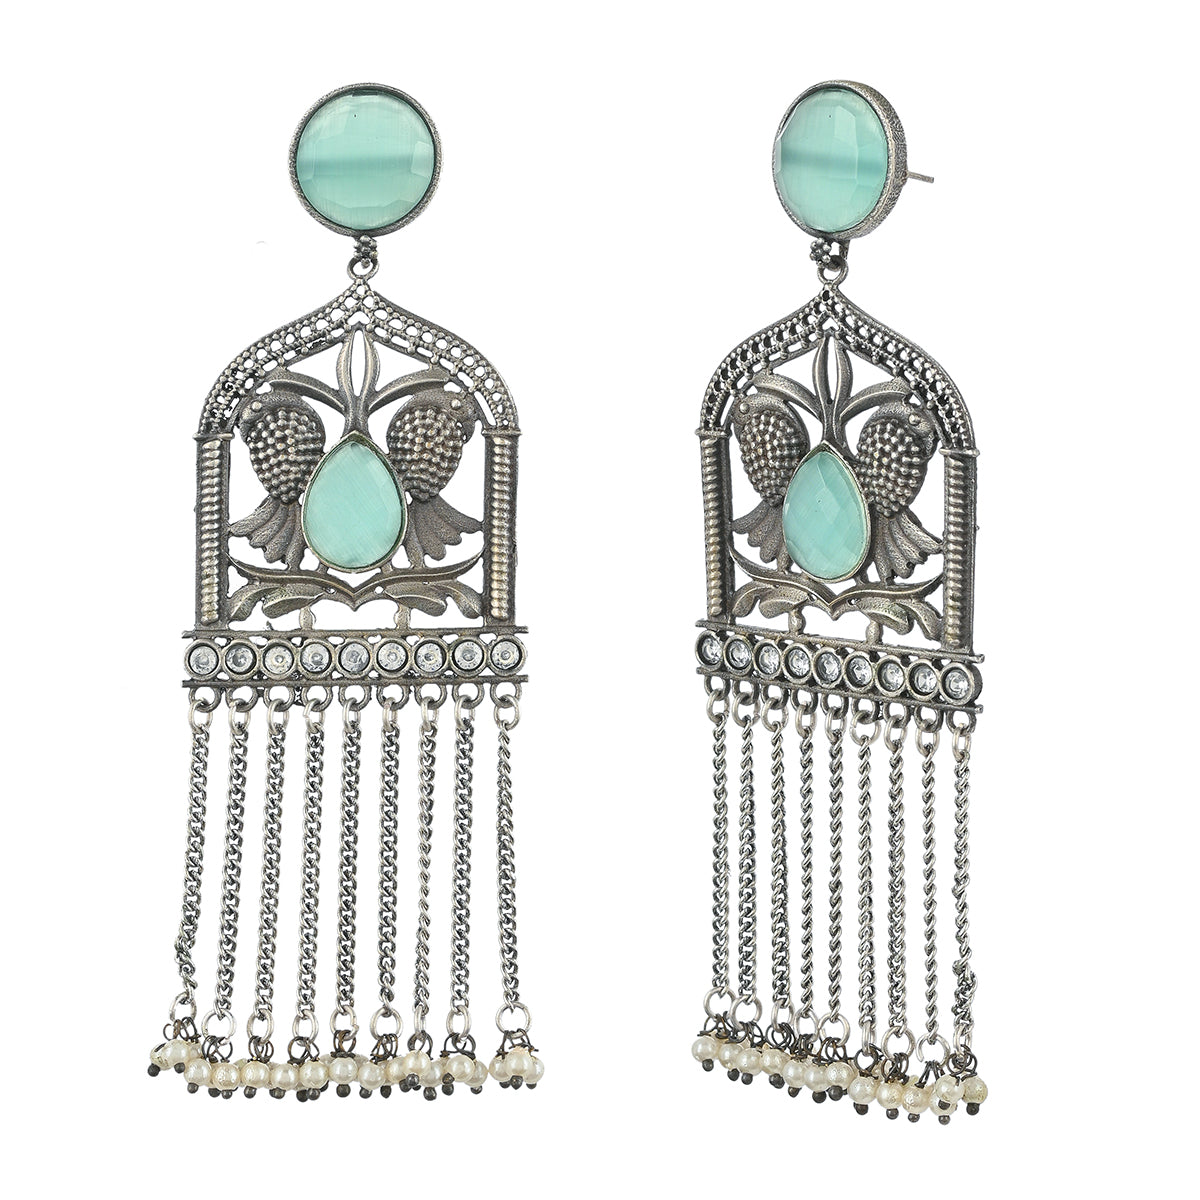 Antique Elegance Teardrop and Round Cut Gems and Faux Pearls Brass Silver Plated Dangler Earrings